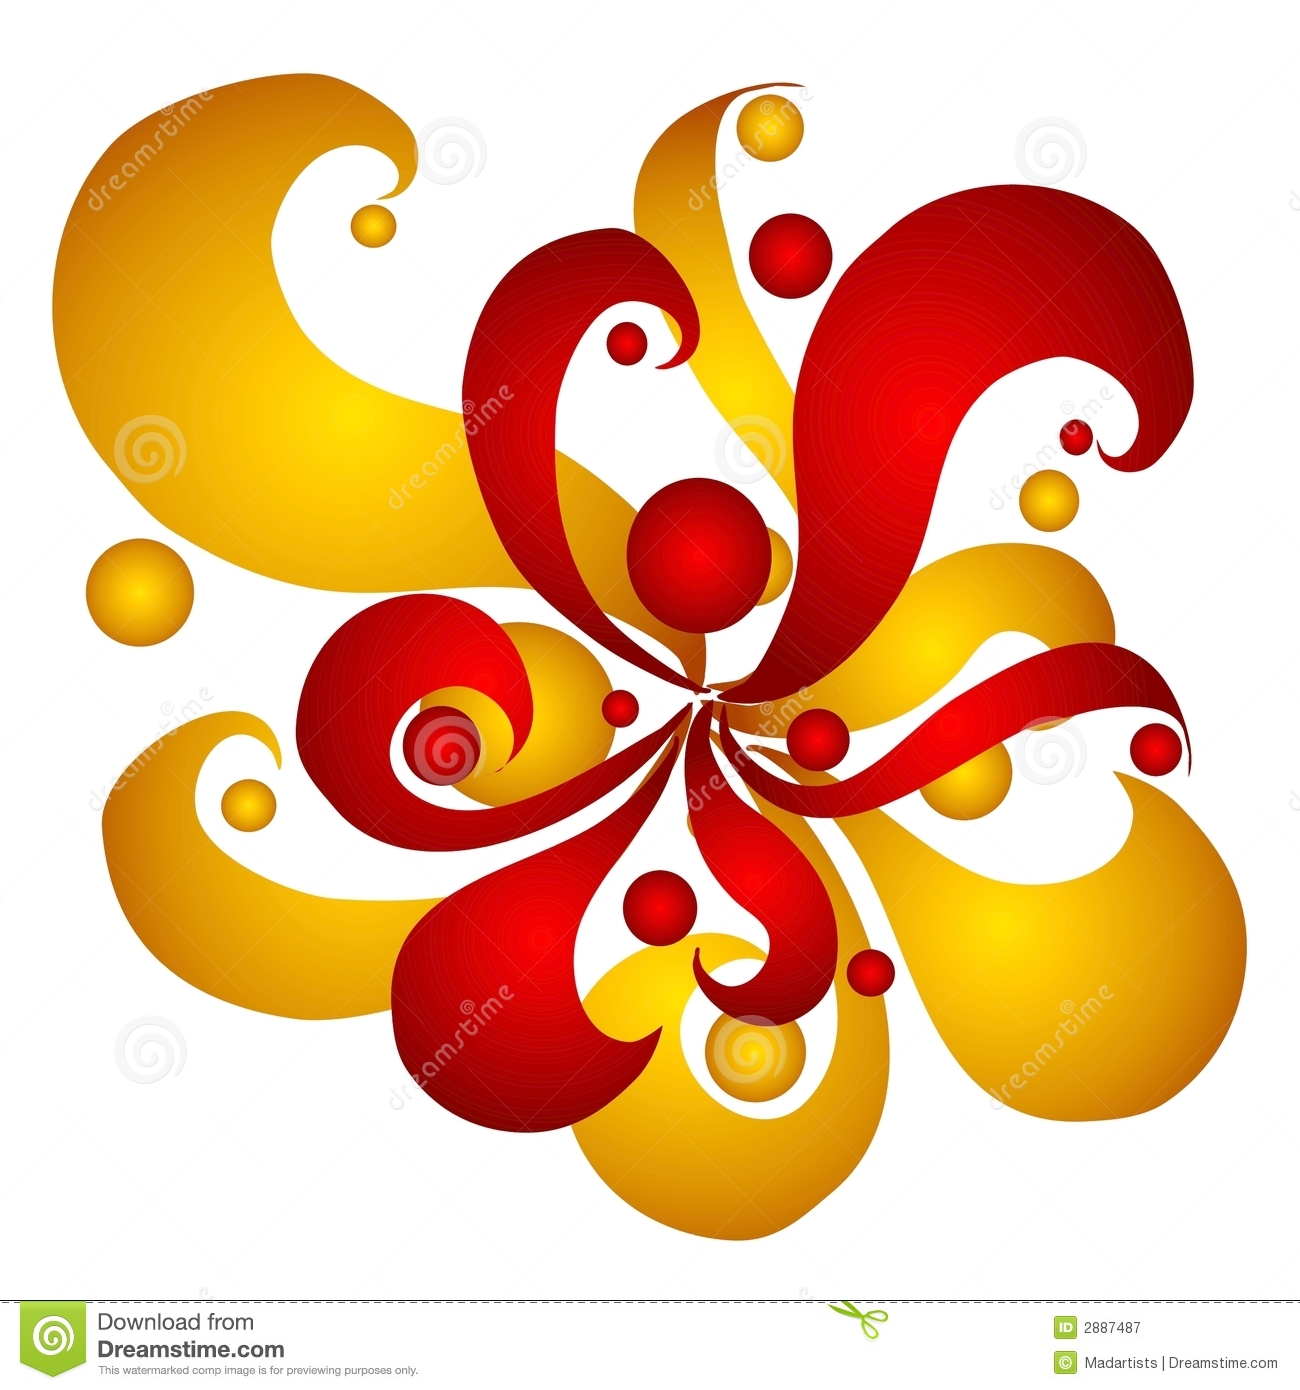 An Abstract Clip Art Illustration Of A Decorative Gold And Red Swirls